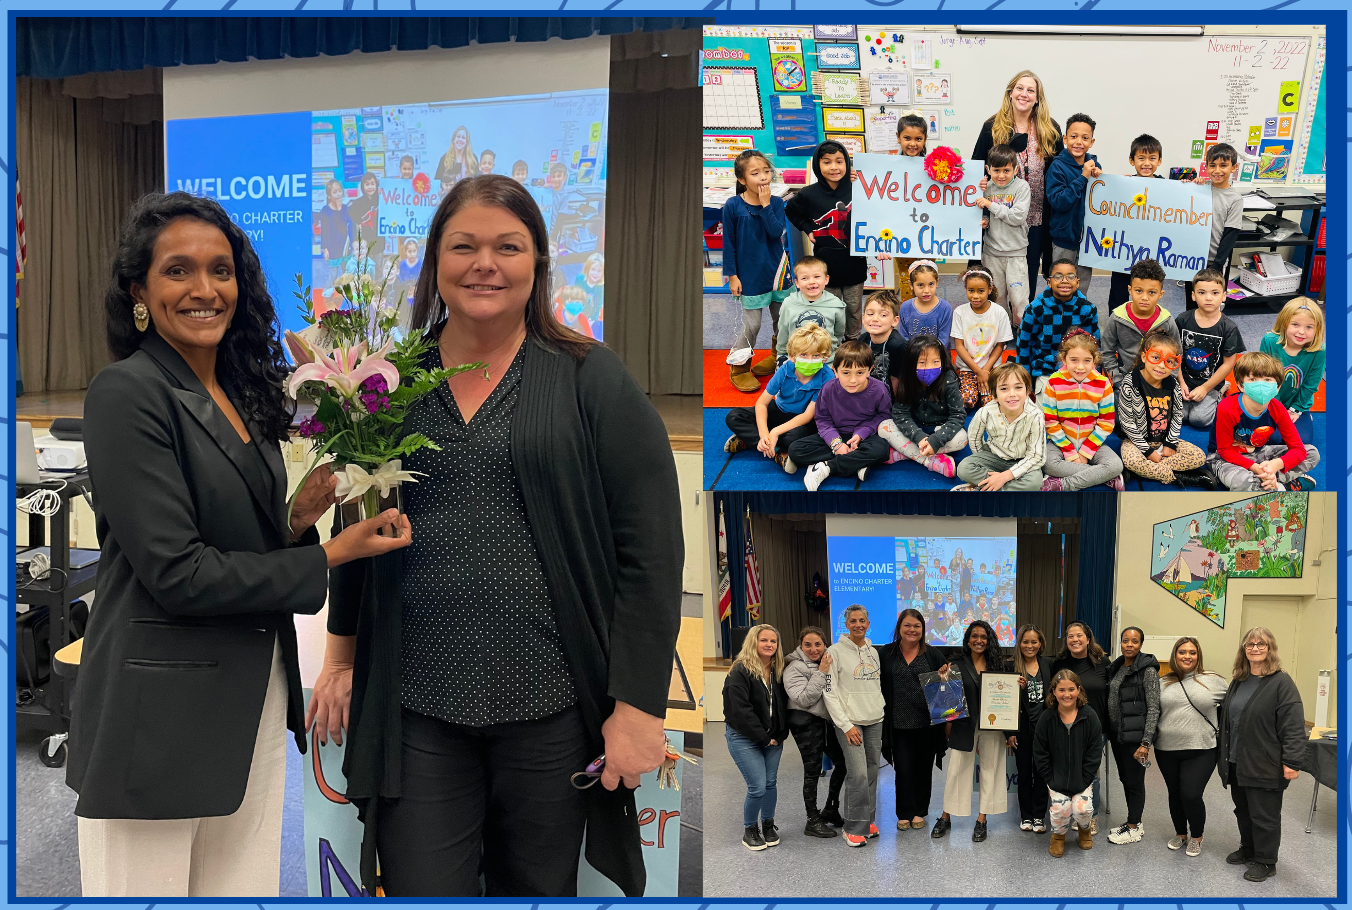 Images from encino charter elementary - photo with PTA standing

with councilmember raman, photo of student classroom holding a \